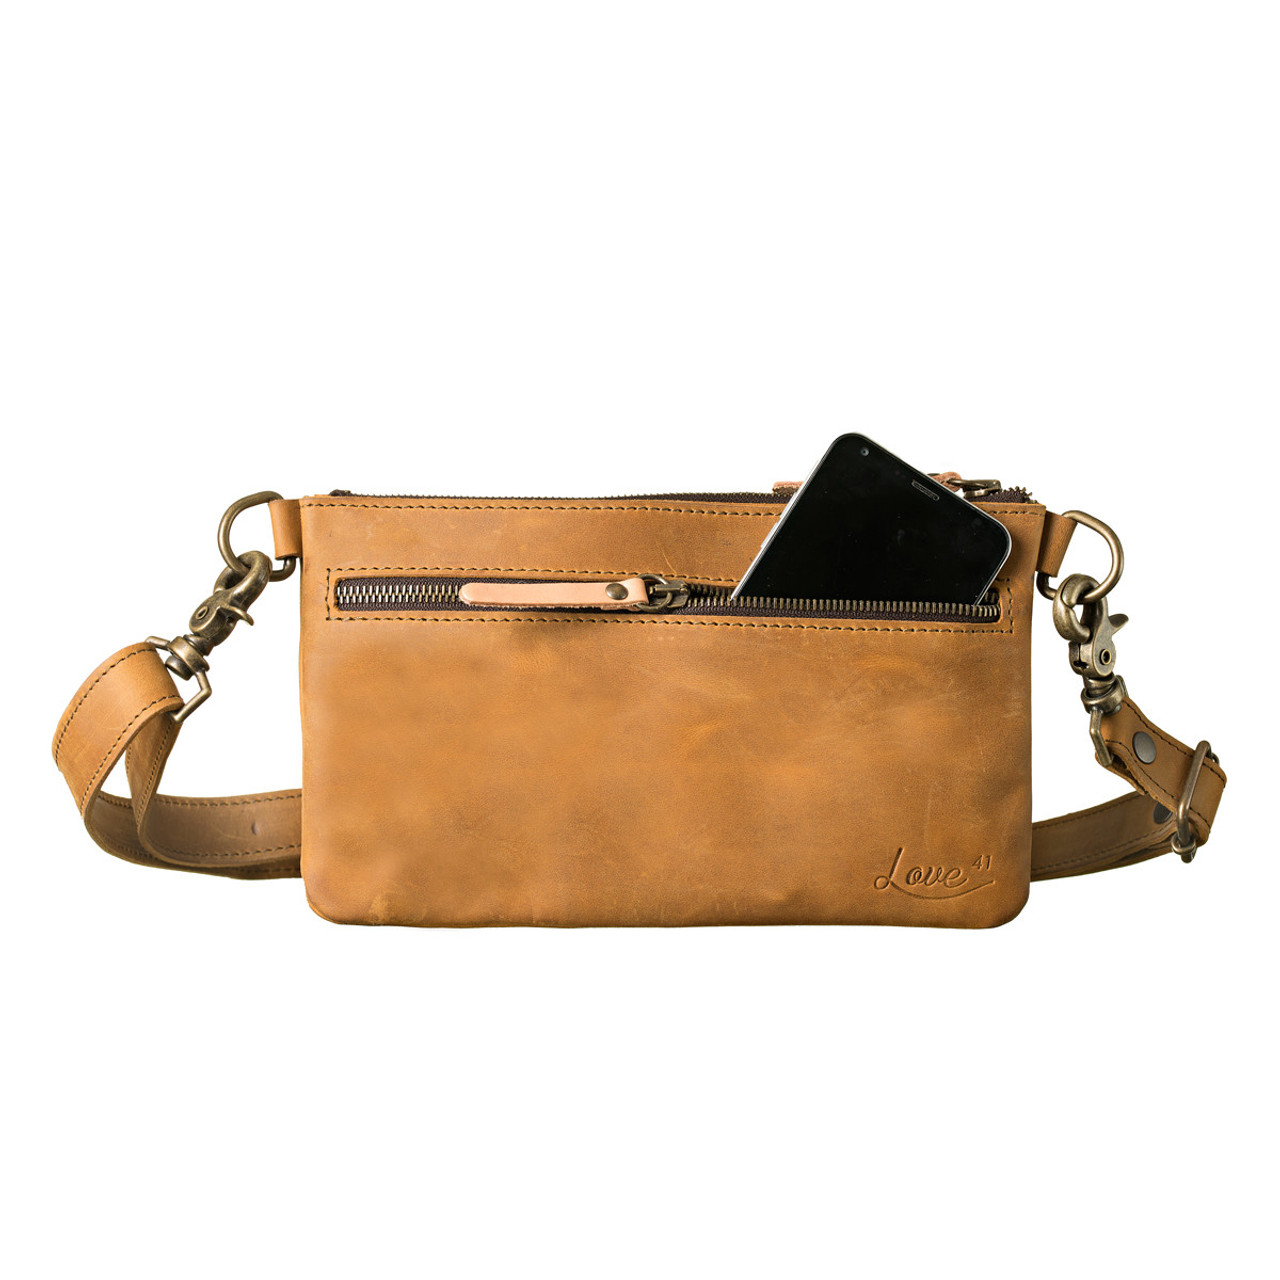 Discovery leather belt bag